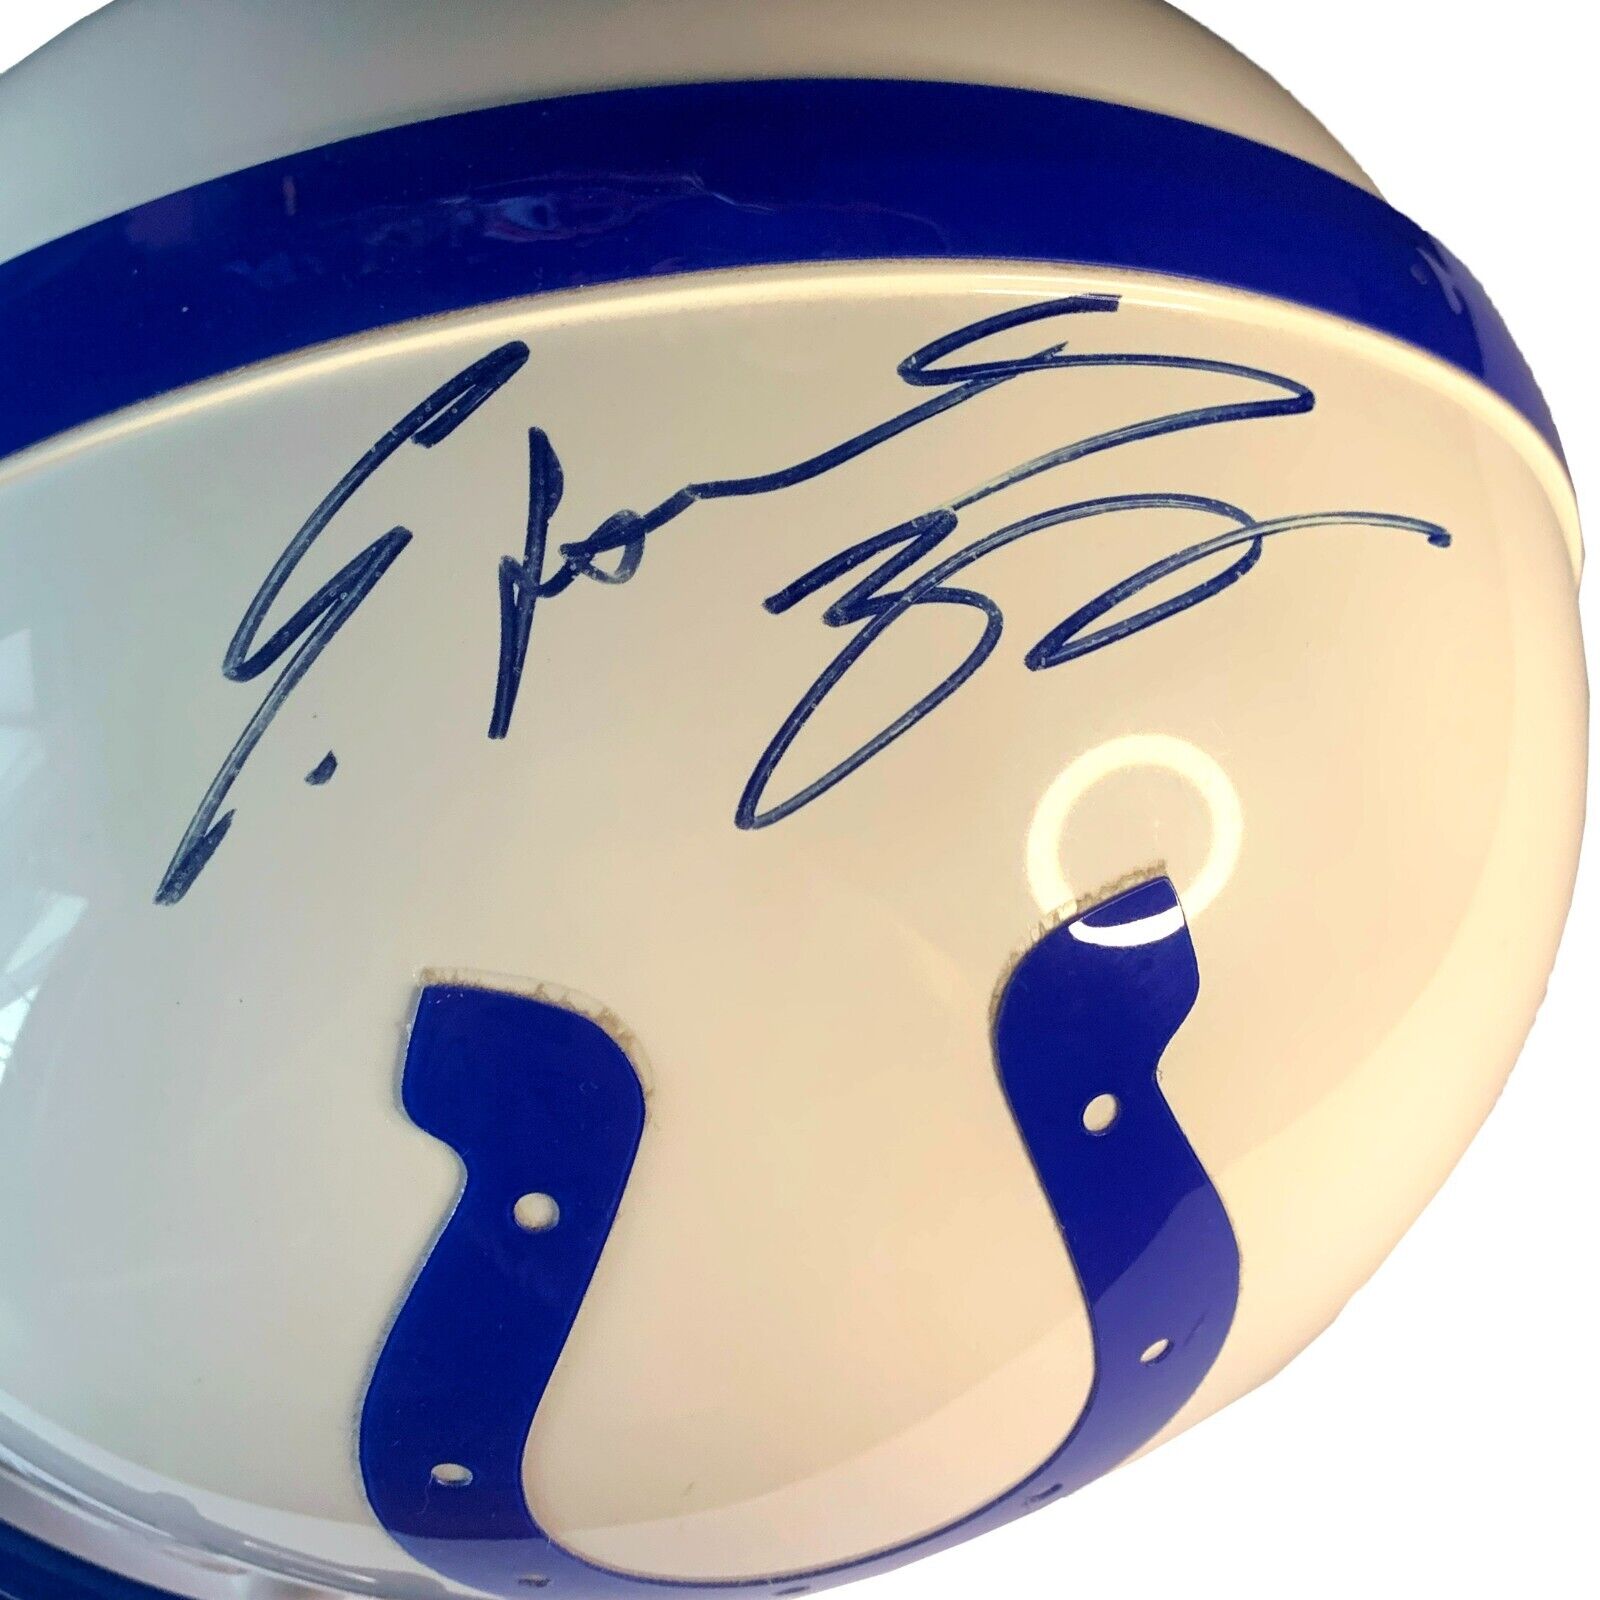 Edgerrin James Autographed Authentic Full Size Football Helmet MM (Indianapolis Colts) - 643-collectibles